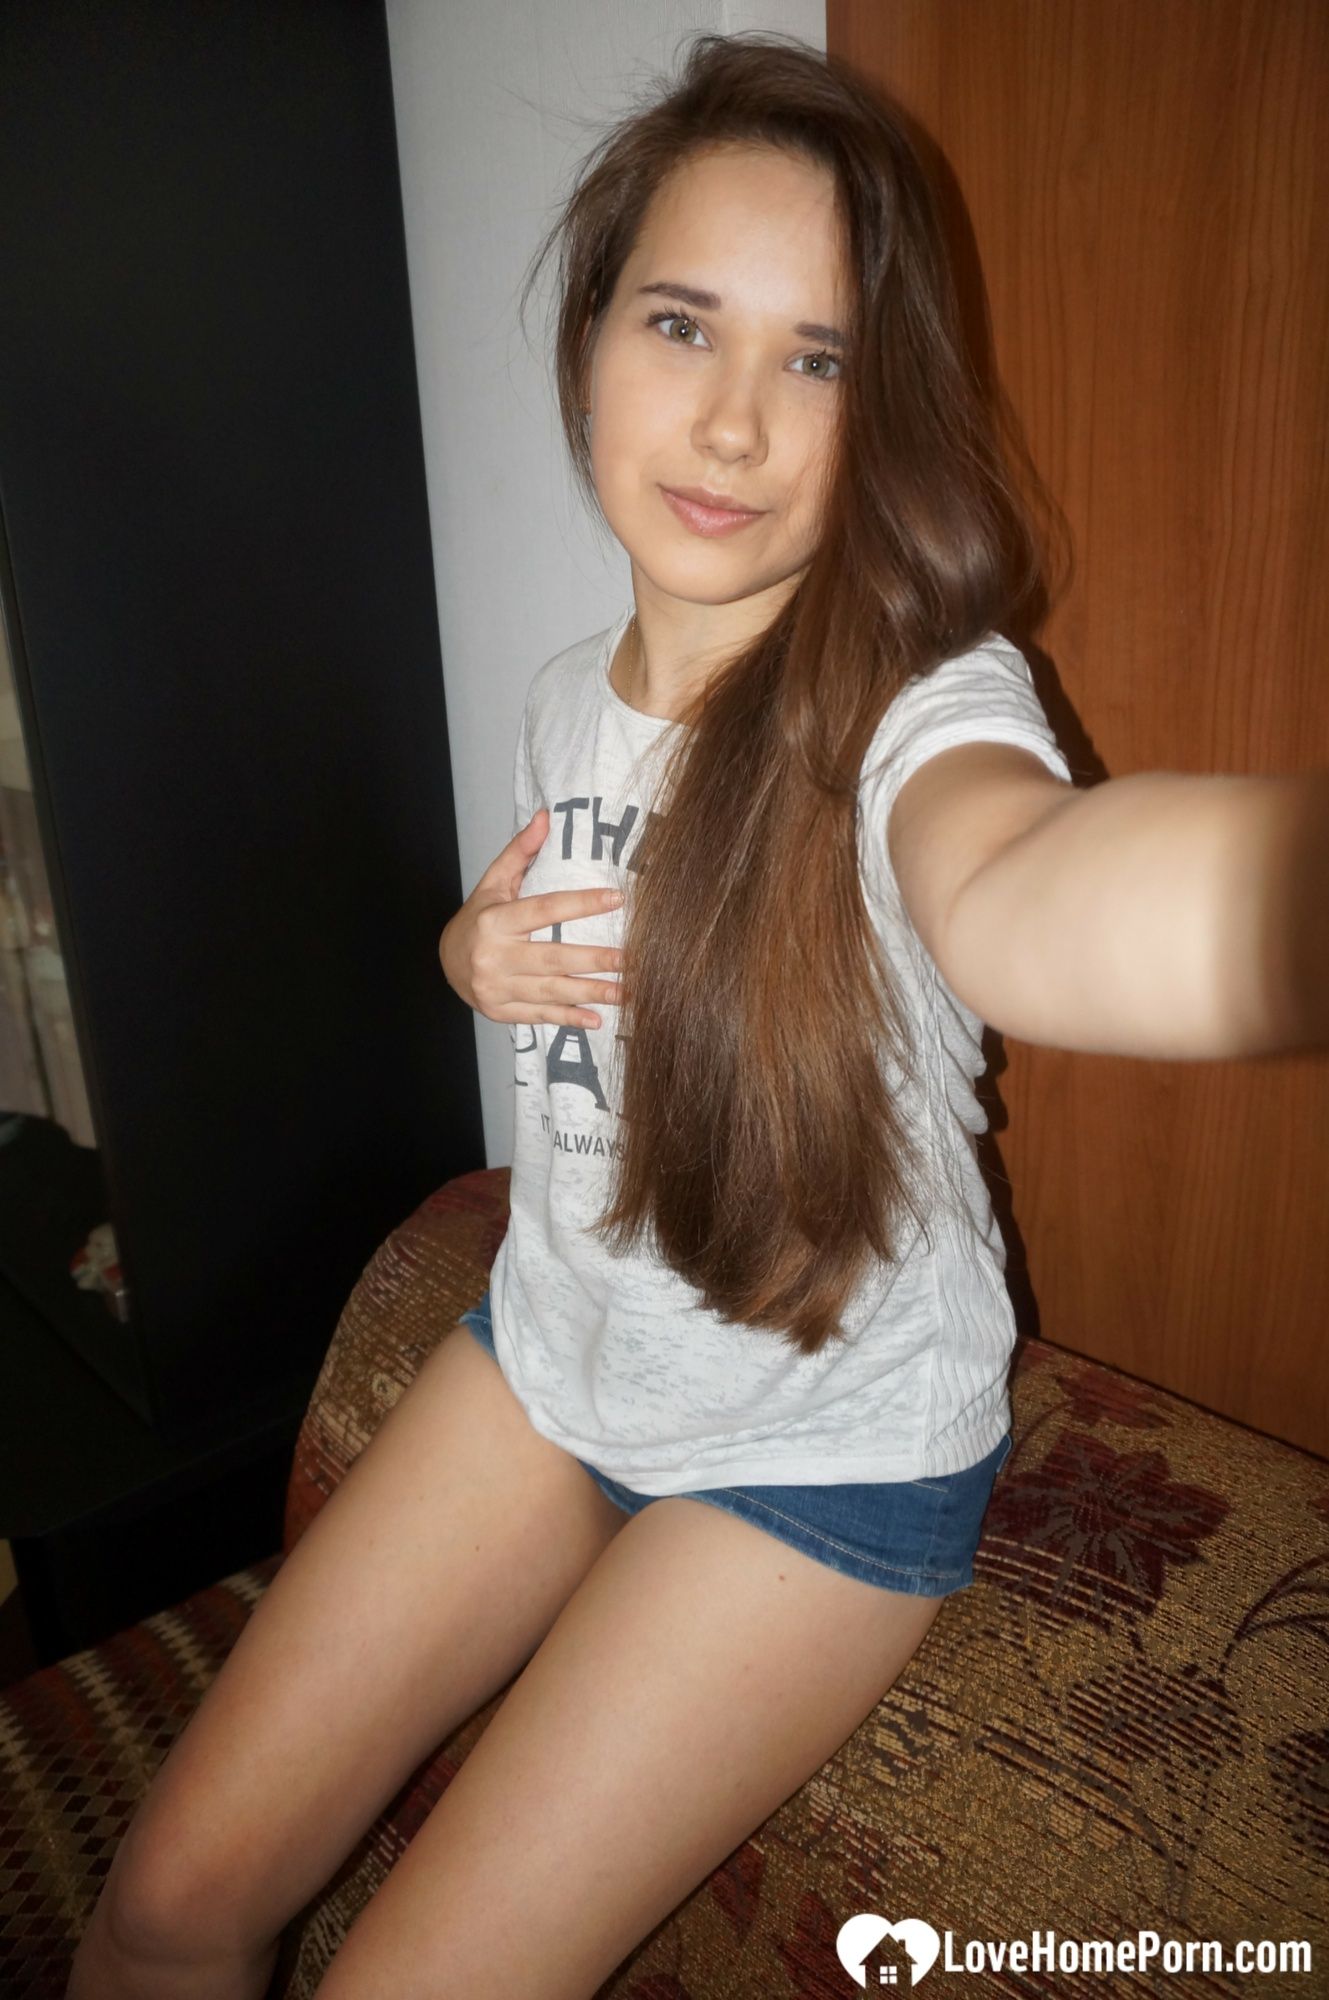 Long-haired teen loves to pose and take nudes #2